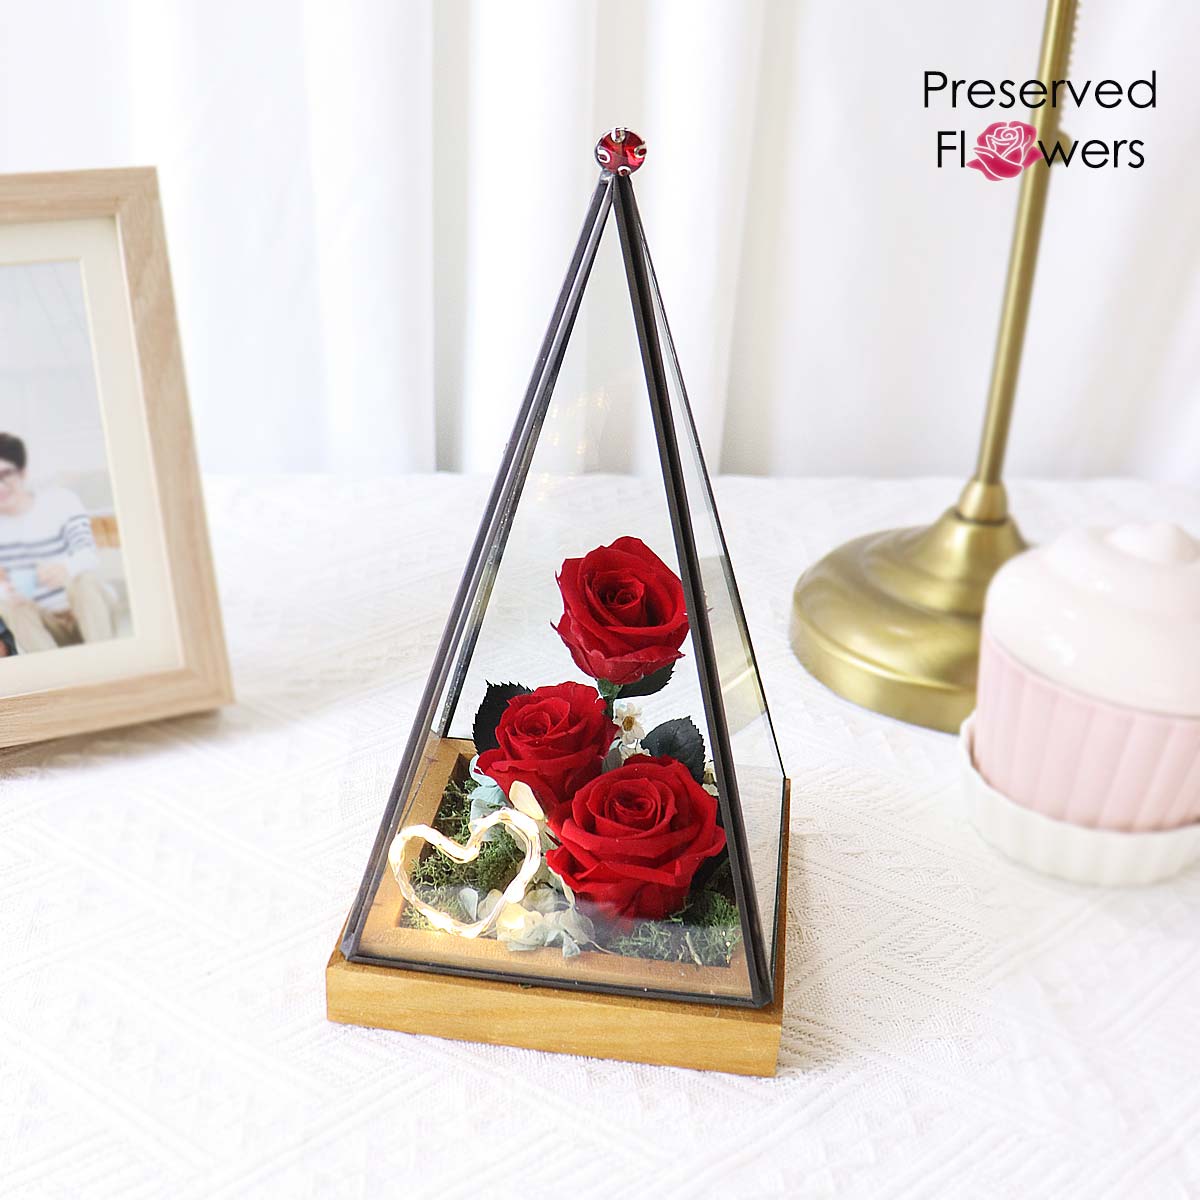 PR2301 Lover’s Domain (Preserved Flowers) 3a